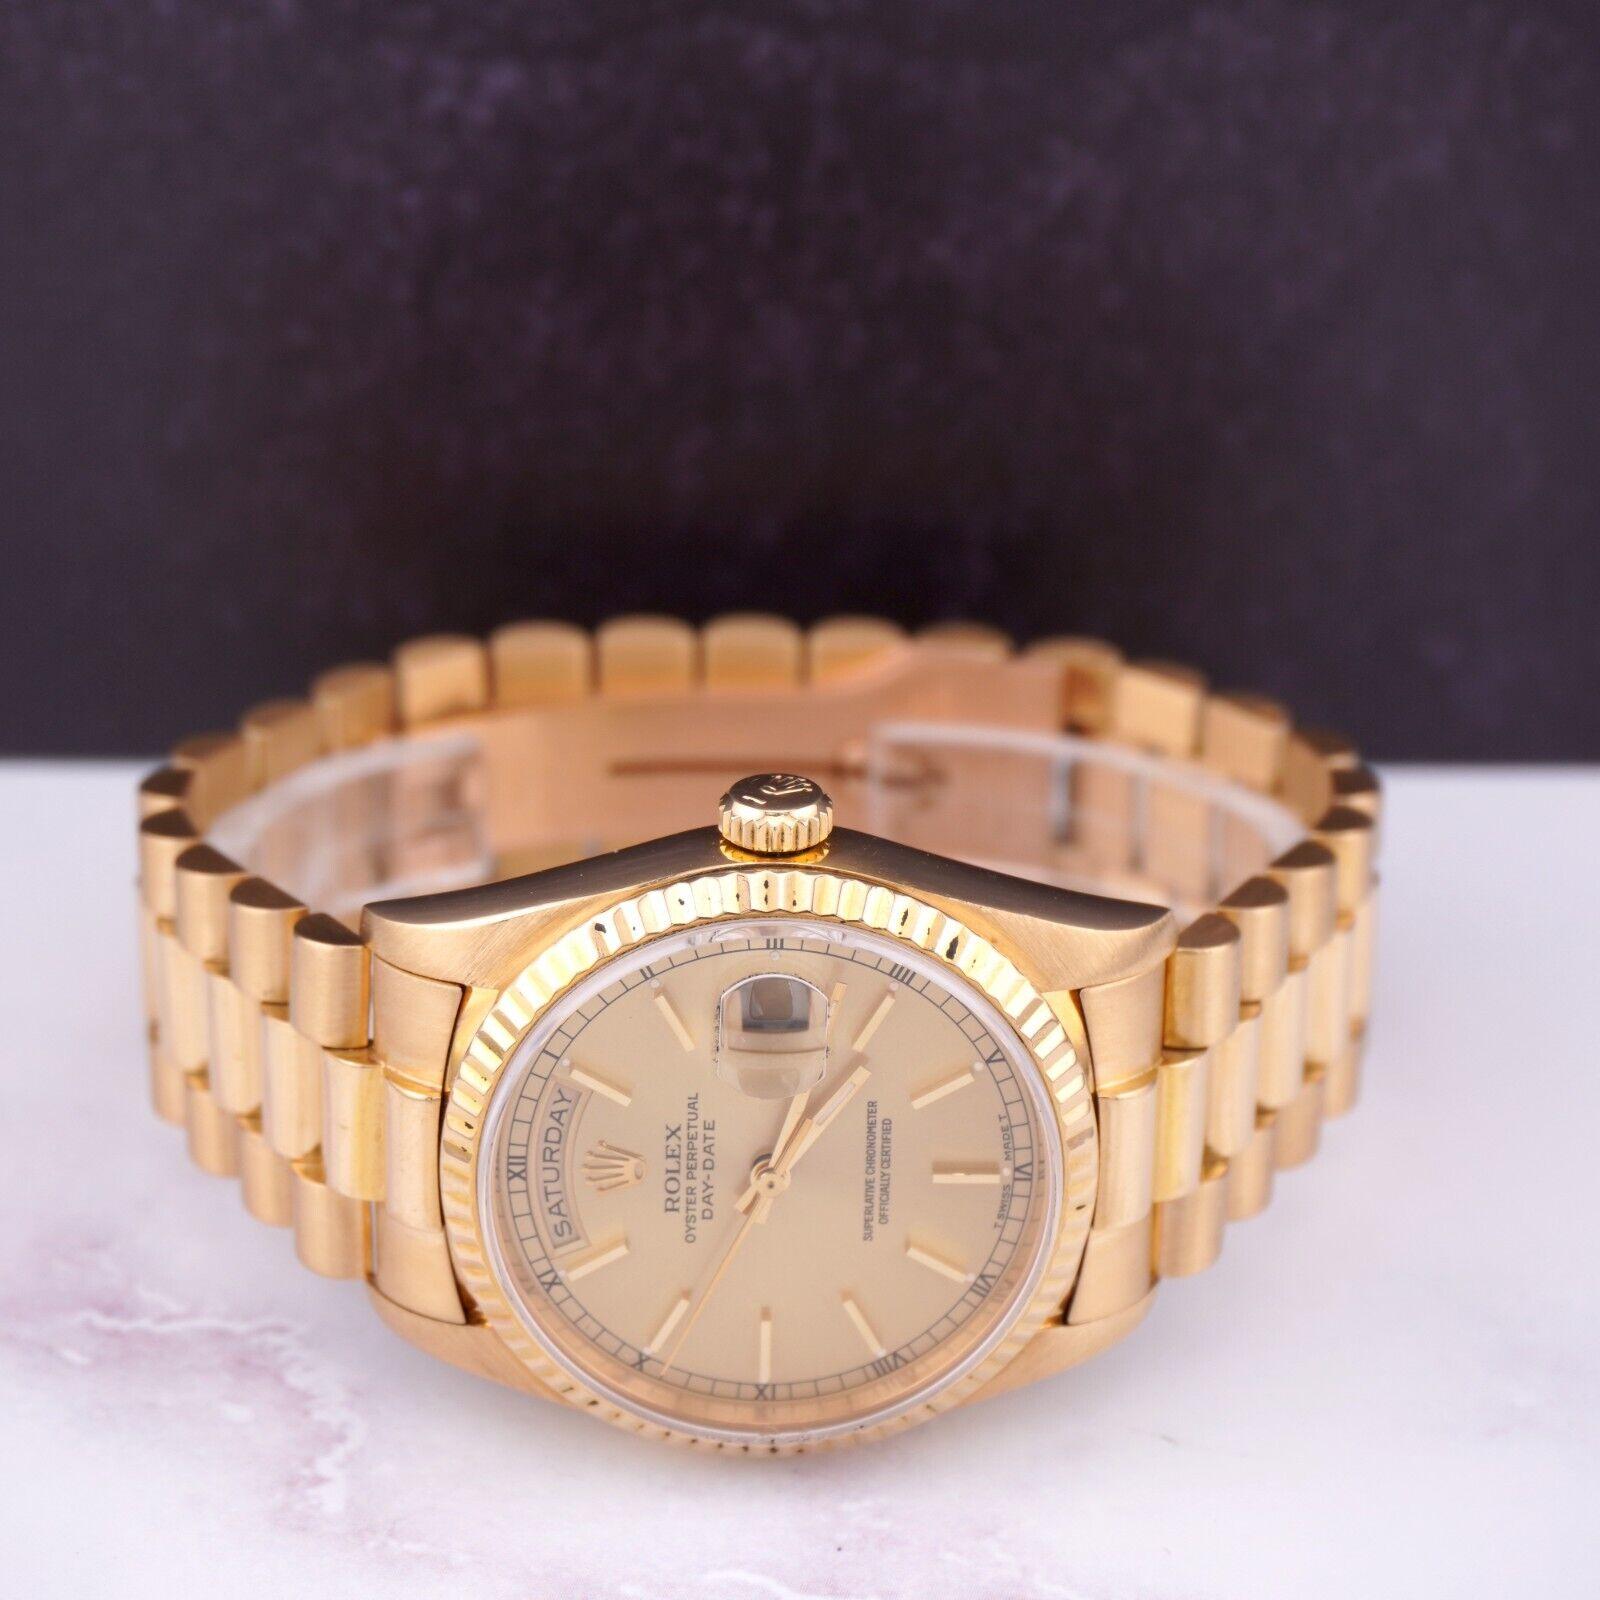 Rolex DAY-DATE 36mm 18K Yellow Gold President Men's Gold Dial Watch Ref: 18238 For Sale 5